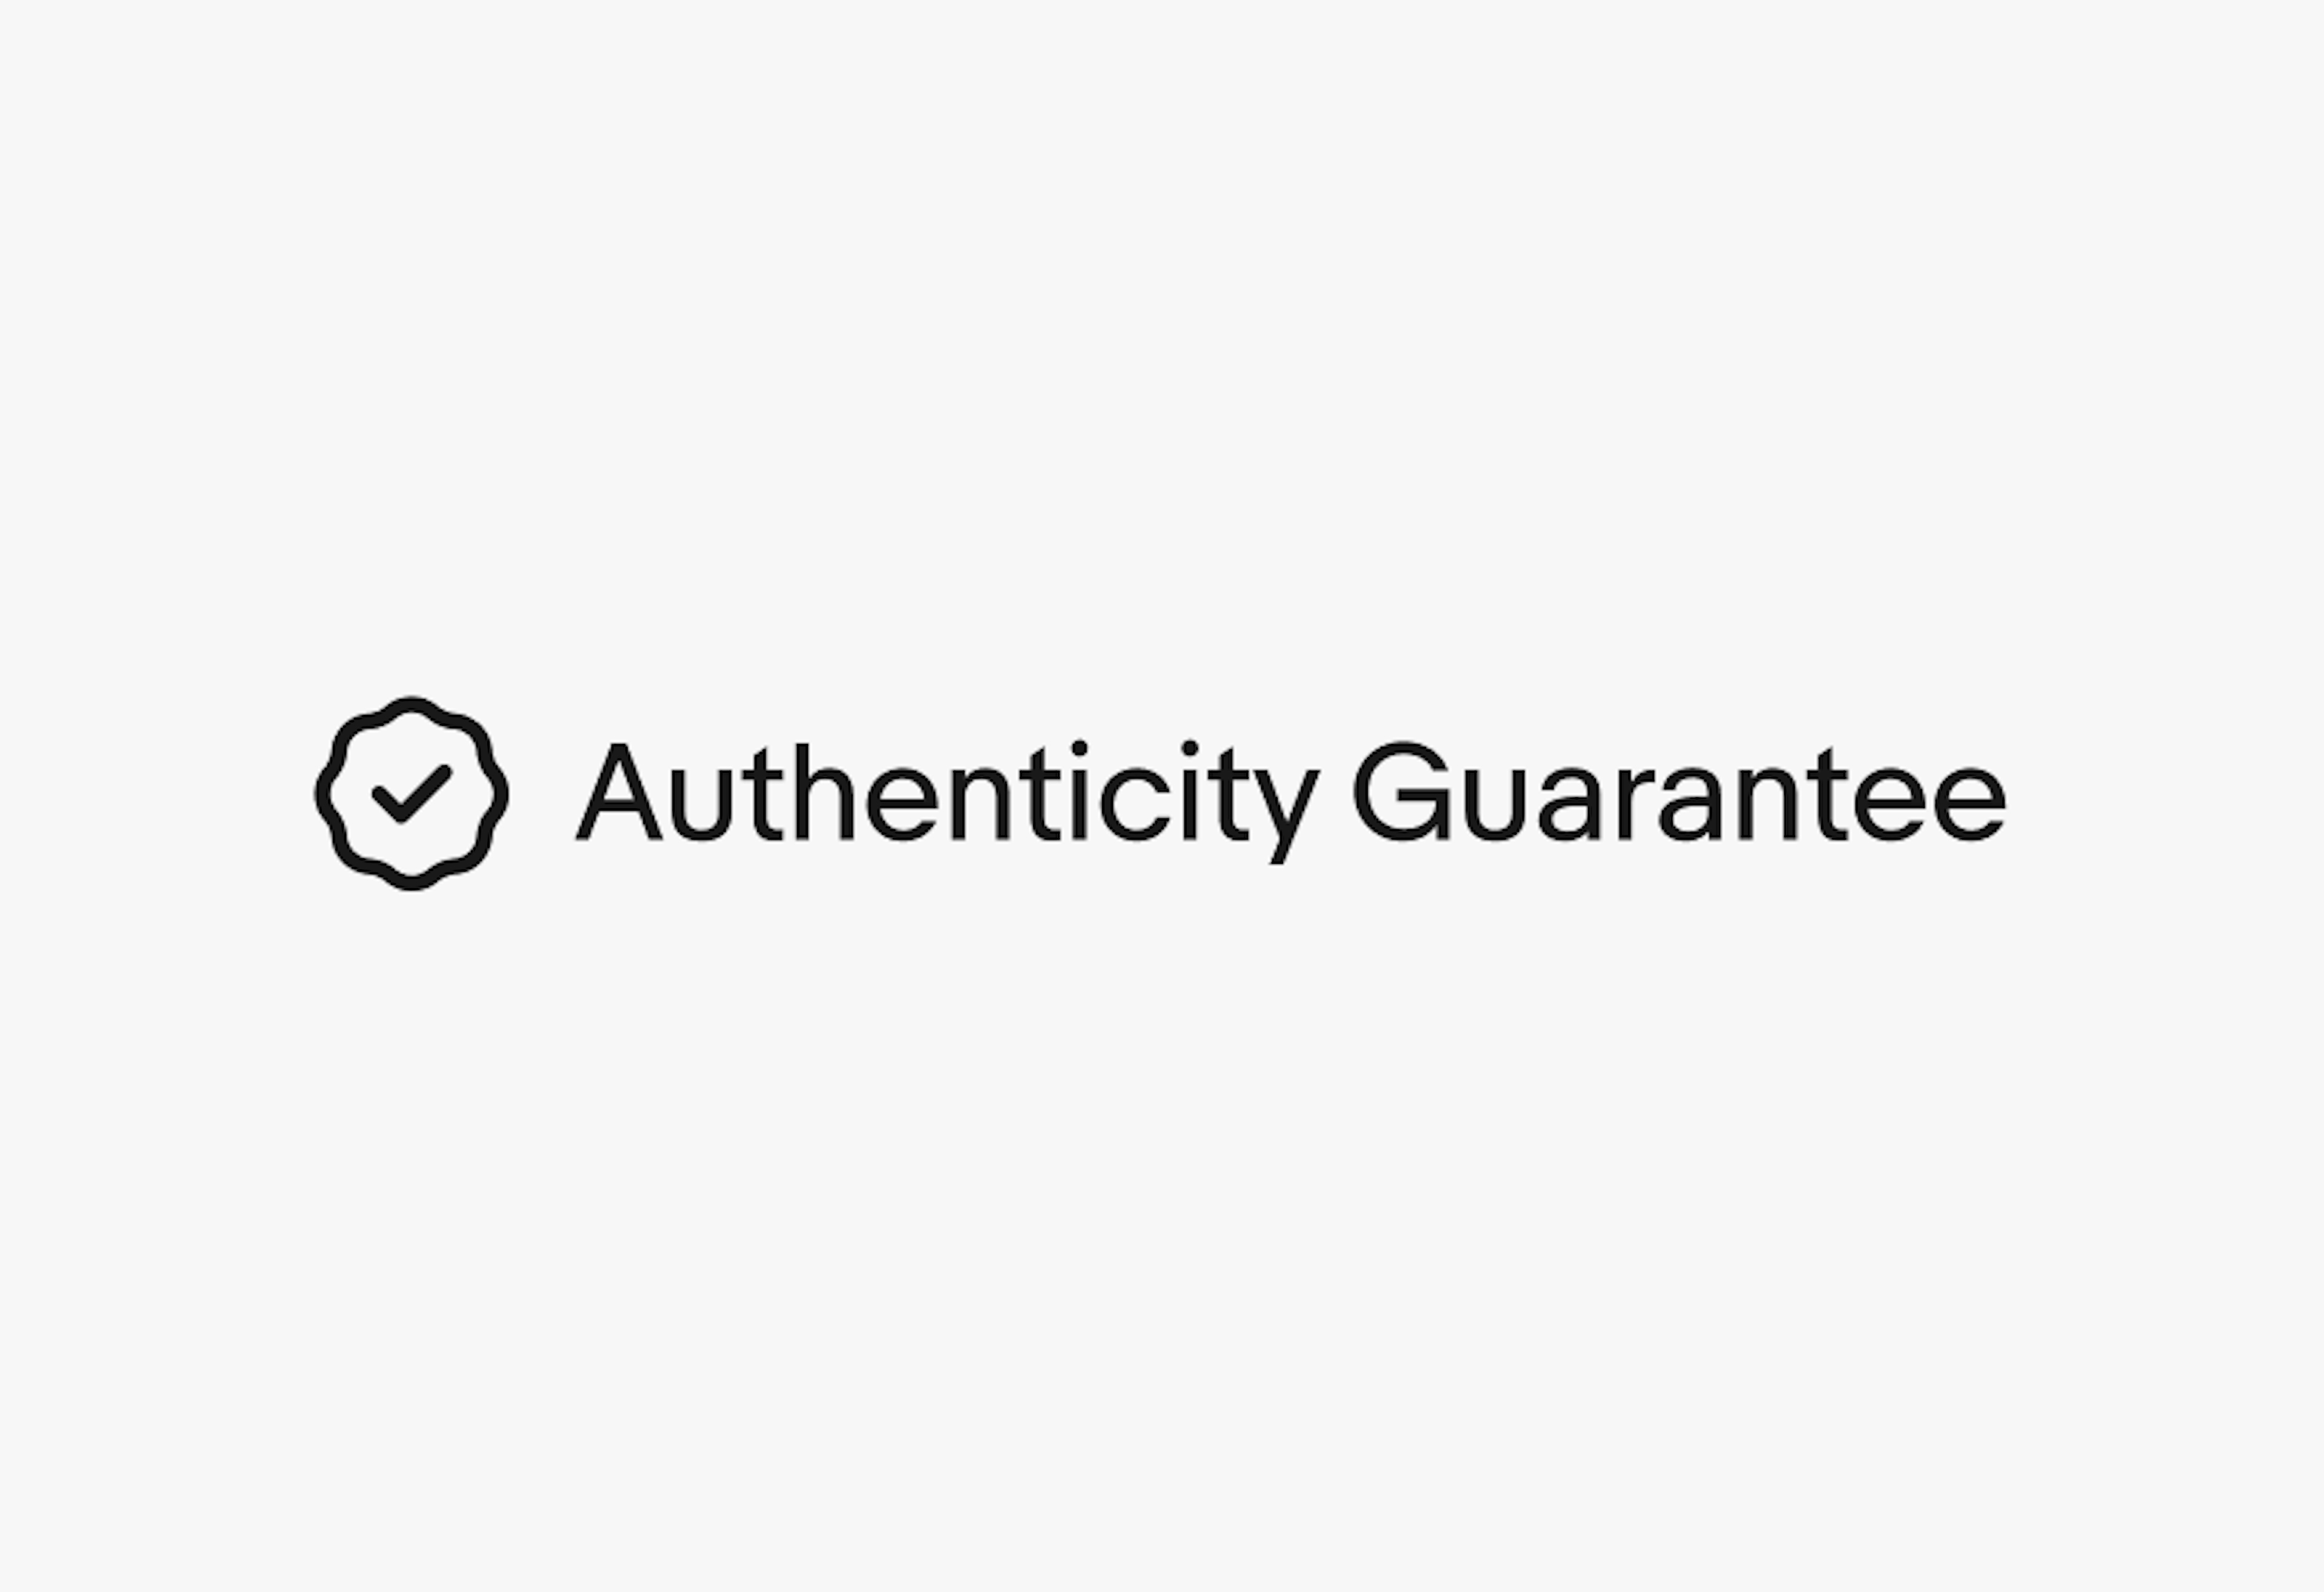 A rosette checkmark icon next to a single line of text “Authenticity Guarantee”.